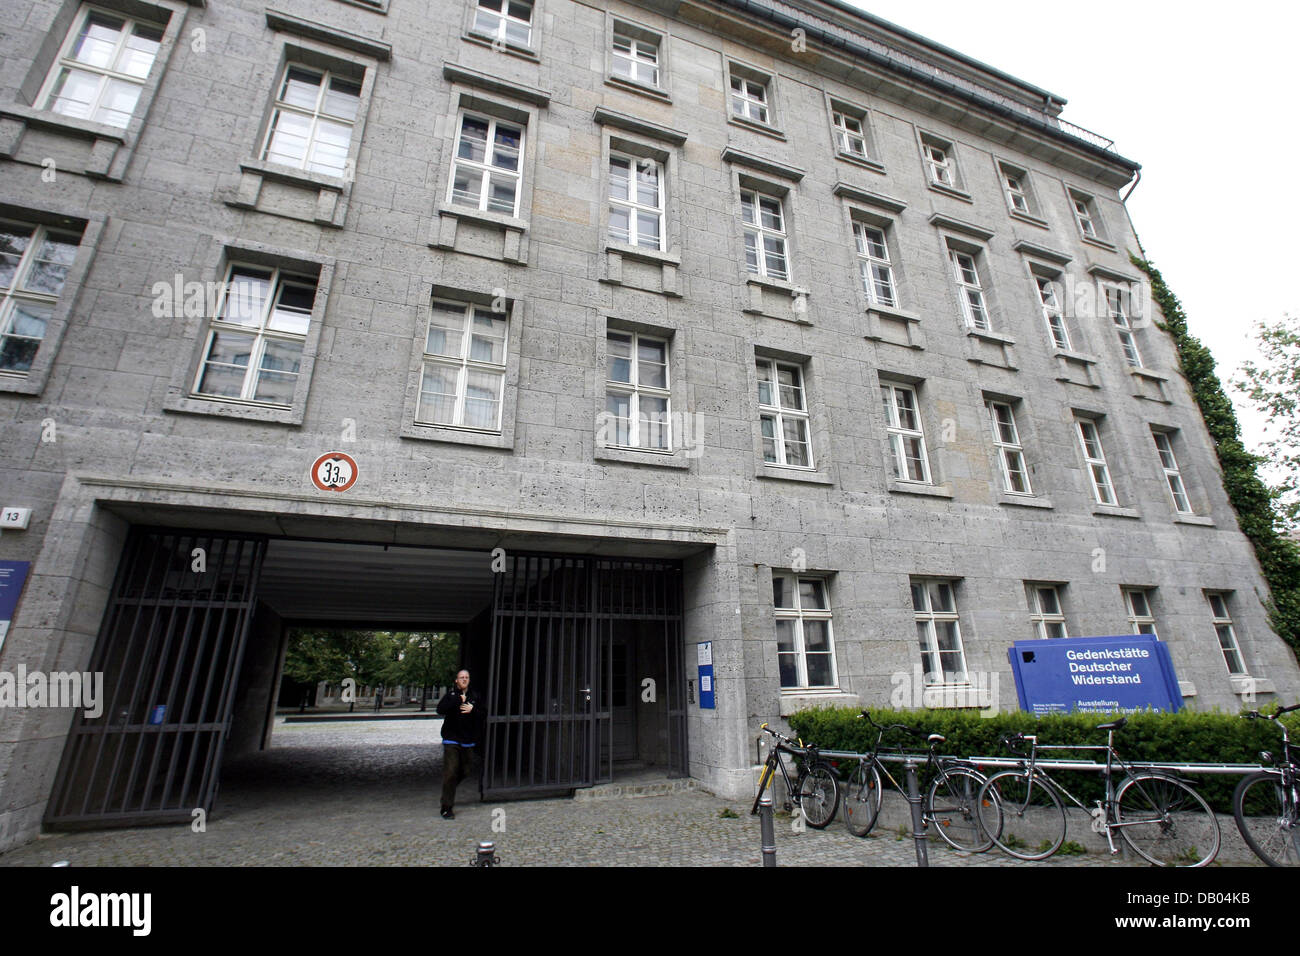 The picture shows the entrance to the Bendlerblock, the German resistance memorial, in Berlin, Germany, 27 June 2007. The historical building hosted German fleet armament, Hitler's speech on 3 February 1933 and the attempted assassination of Hitler on 20 July 1944. Avowed scientologist Tom Cruise plans to play resistance fighter Claus Schenk Graf von Stauffenberg, who was shot that Stock Photo